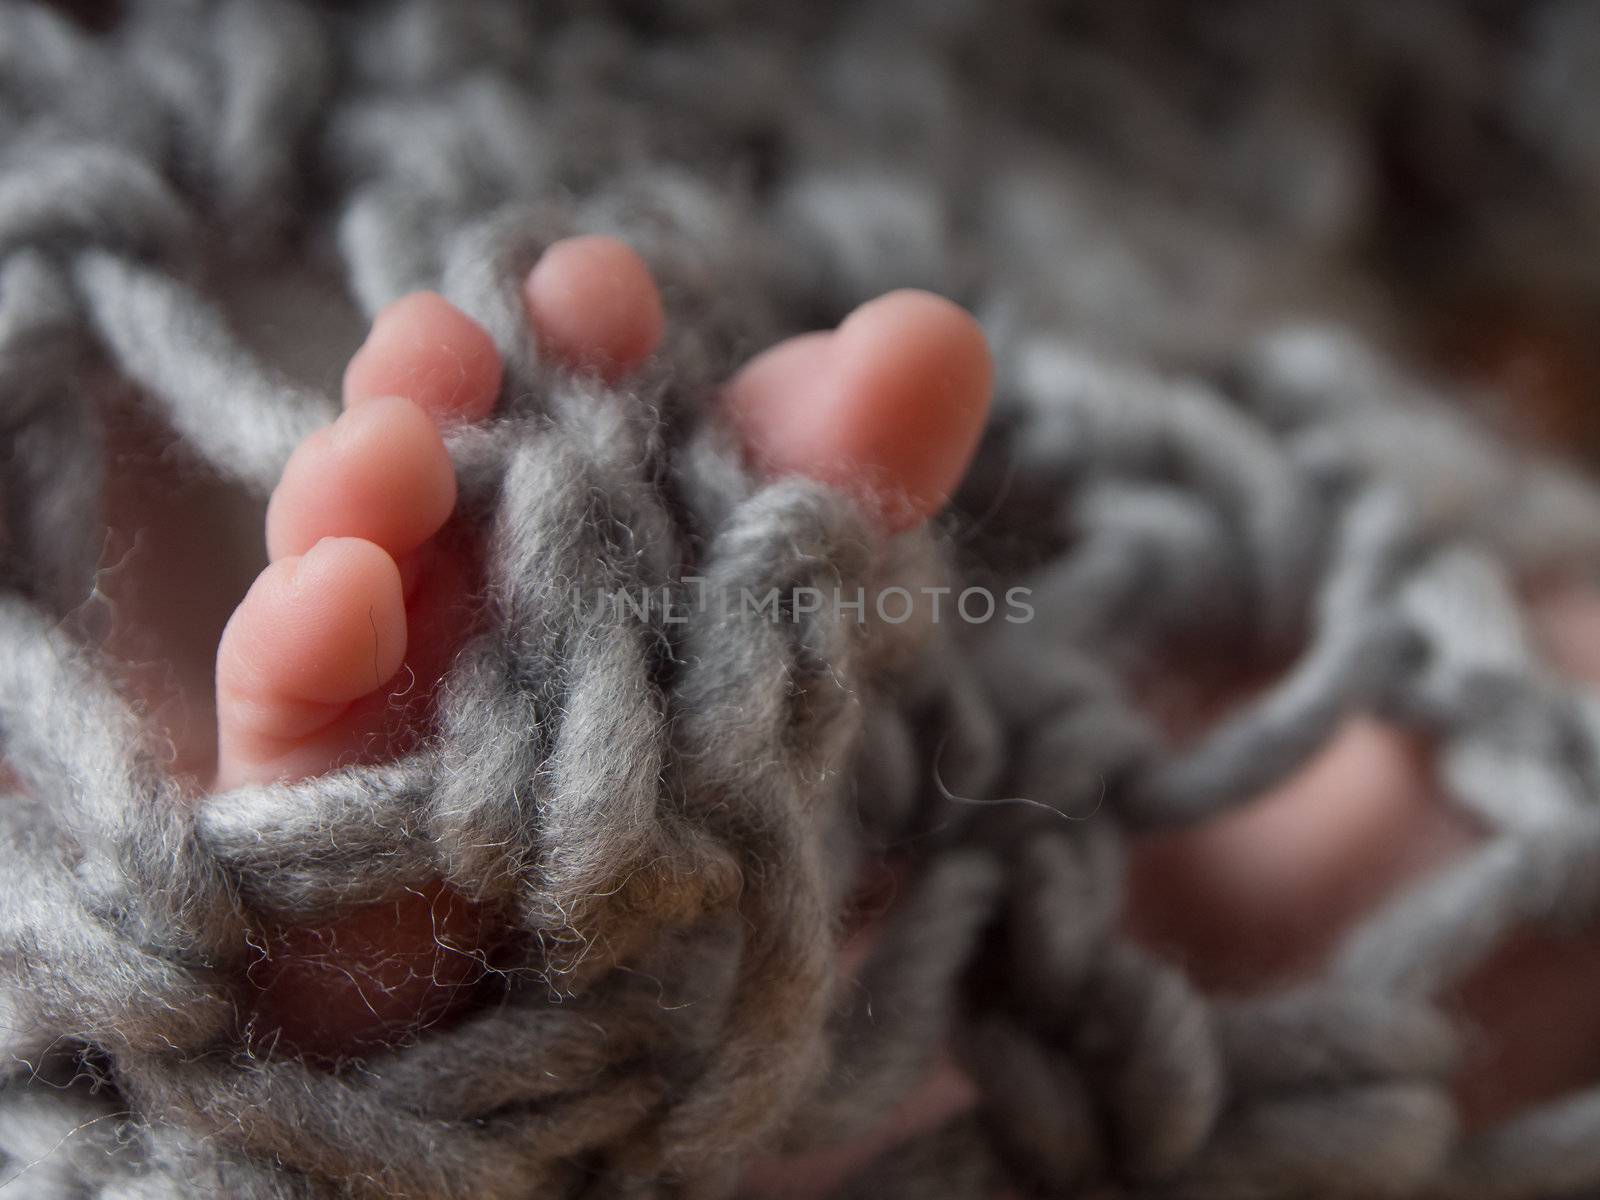 Newborn feets and toes through knitting